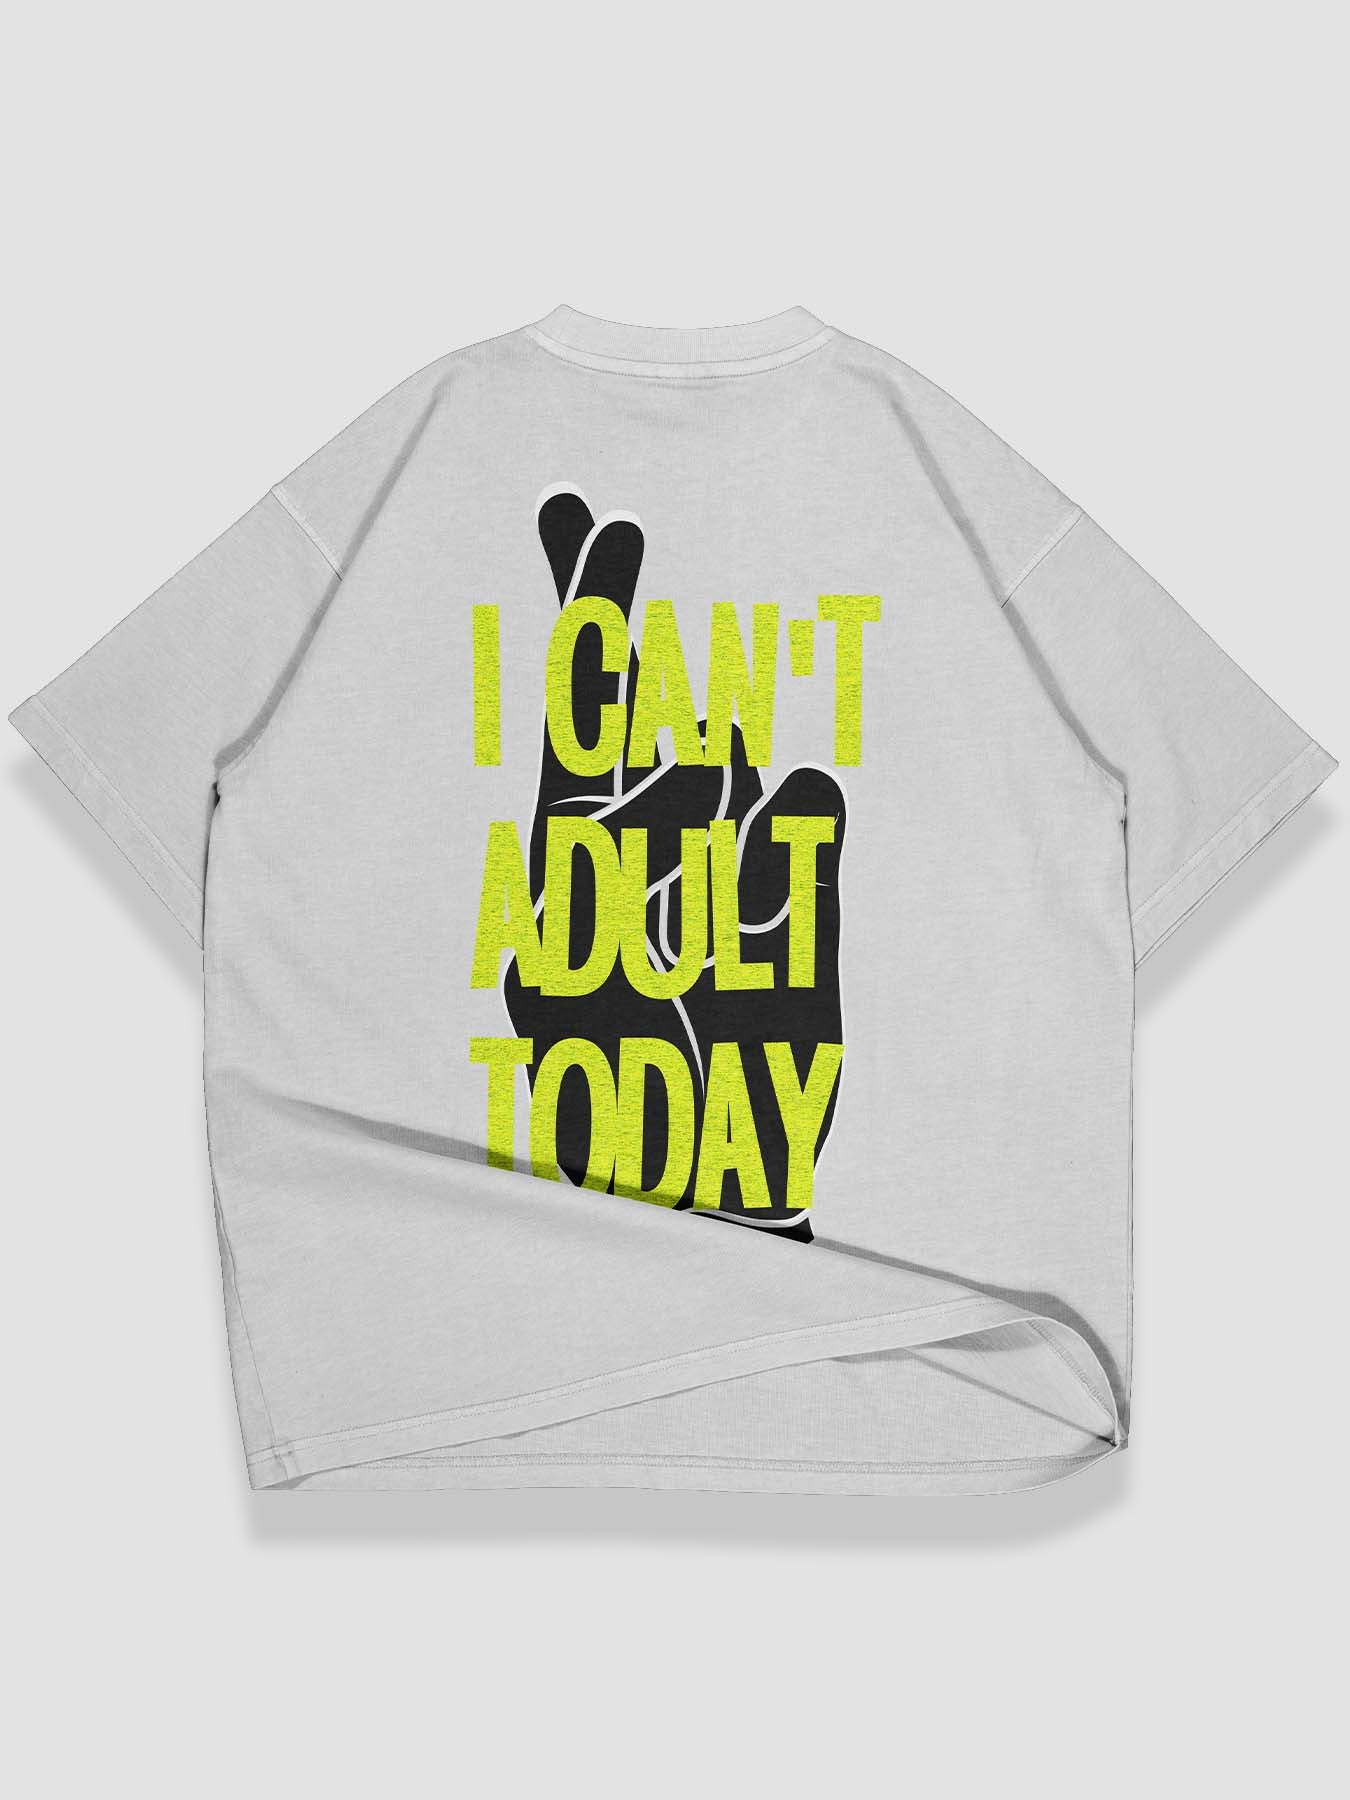 Can't Adult Today Urban Fit Oversize T-shirt - keos.life